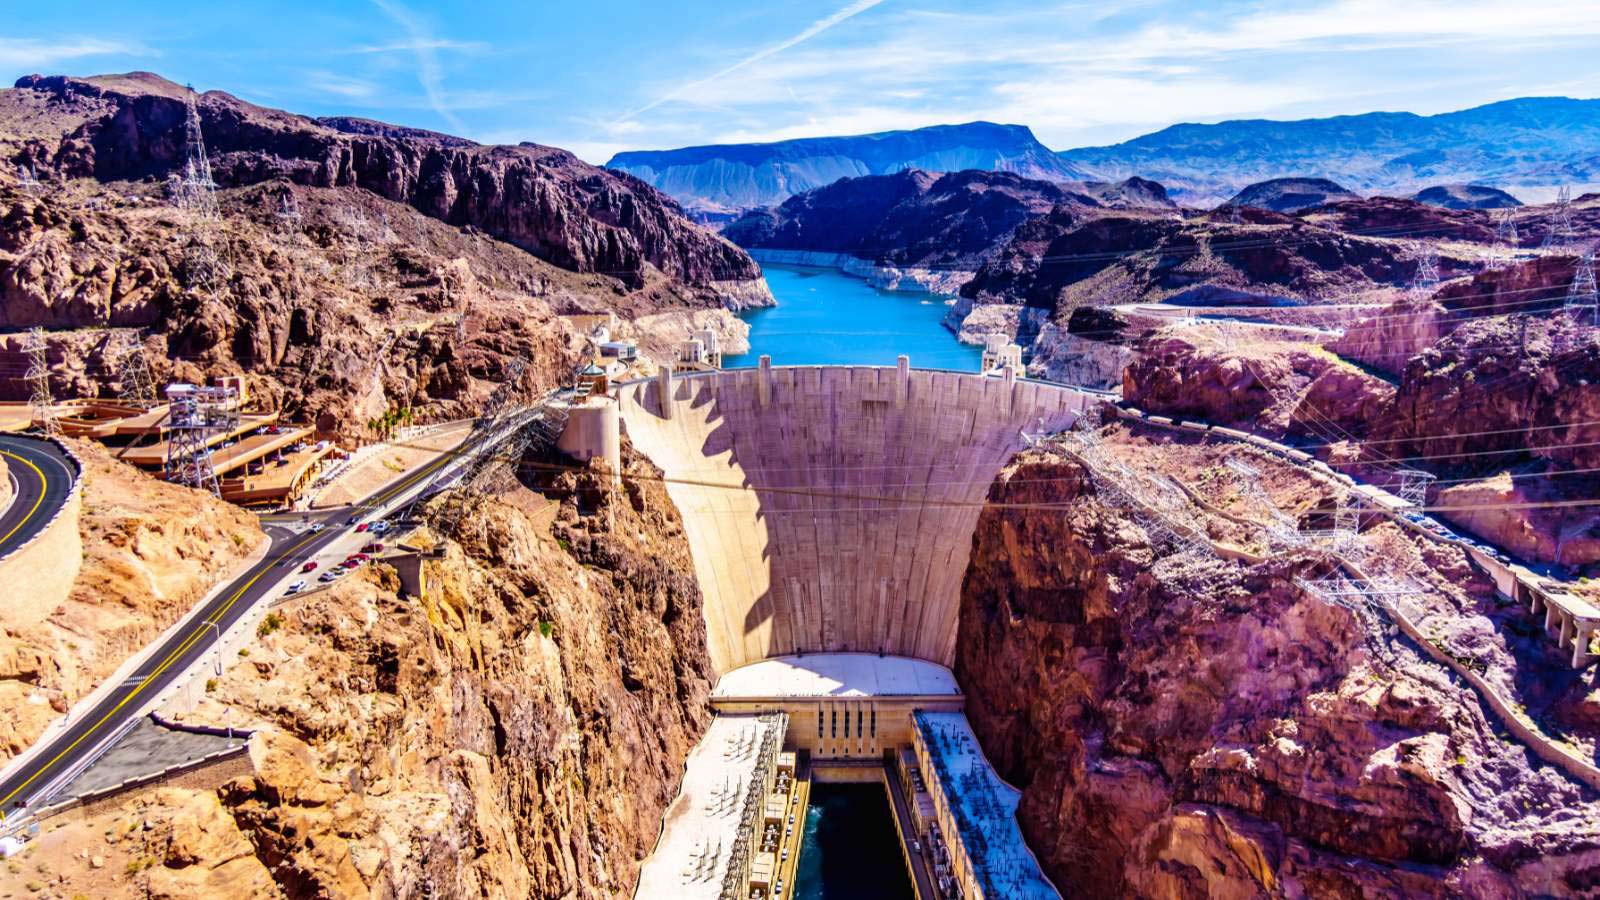 <p>The Hoover Dam is a massive concrete dam located on the border of Arizona and Nevada. It’s a popular tourist destination and offers tours and exhibits about the history of the dam and its construction. The dam is 726 feet tall and is a true engineering marvel.</p>